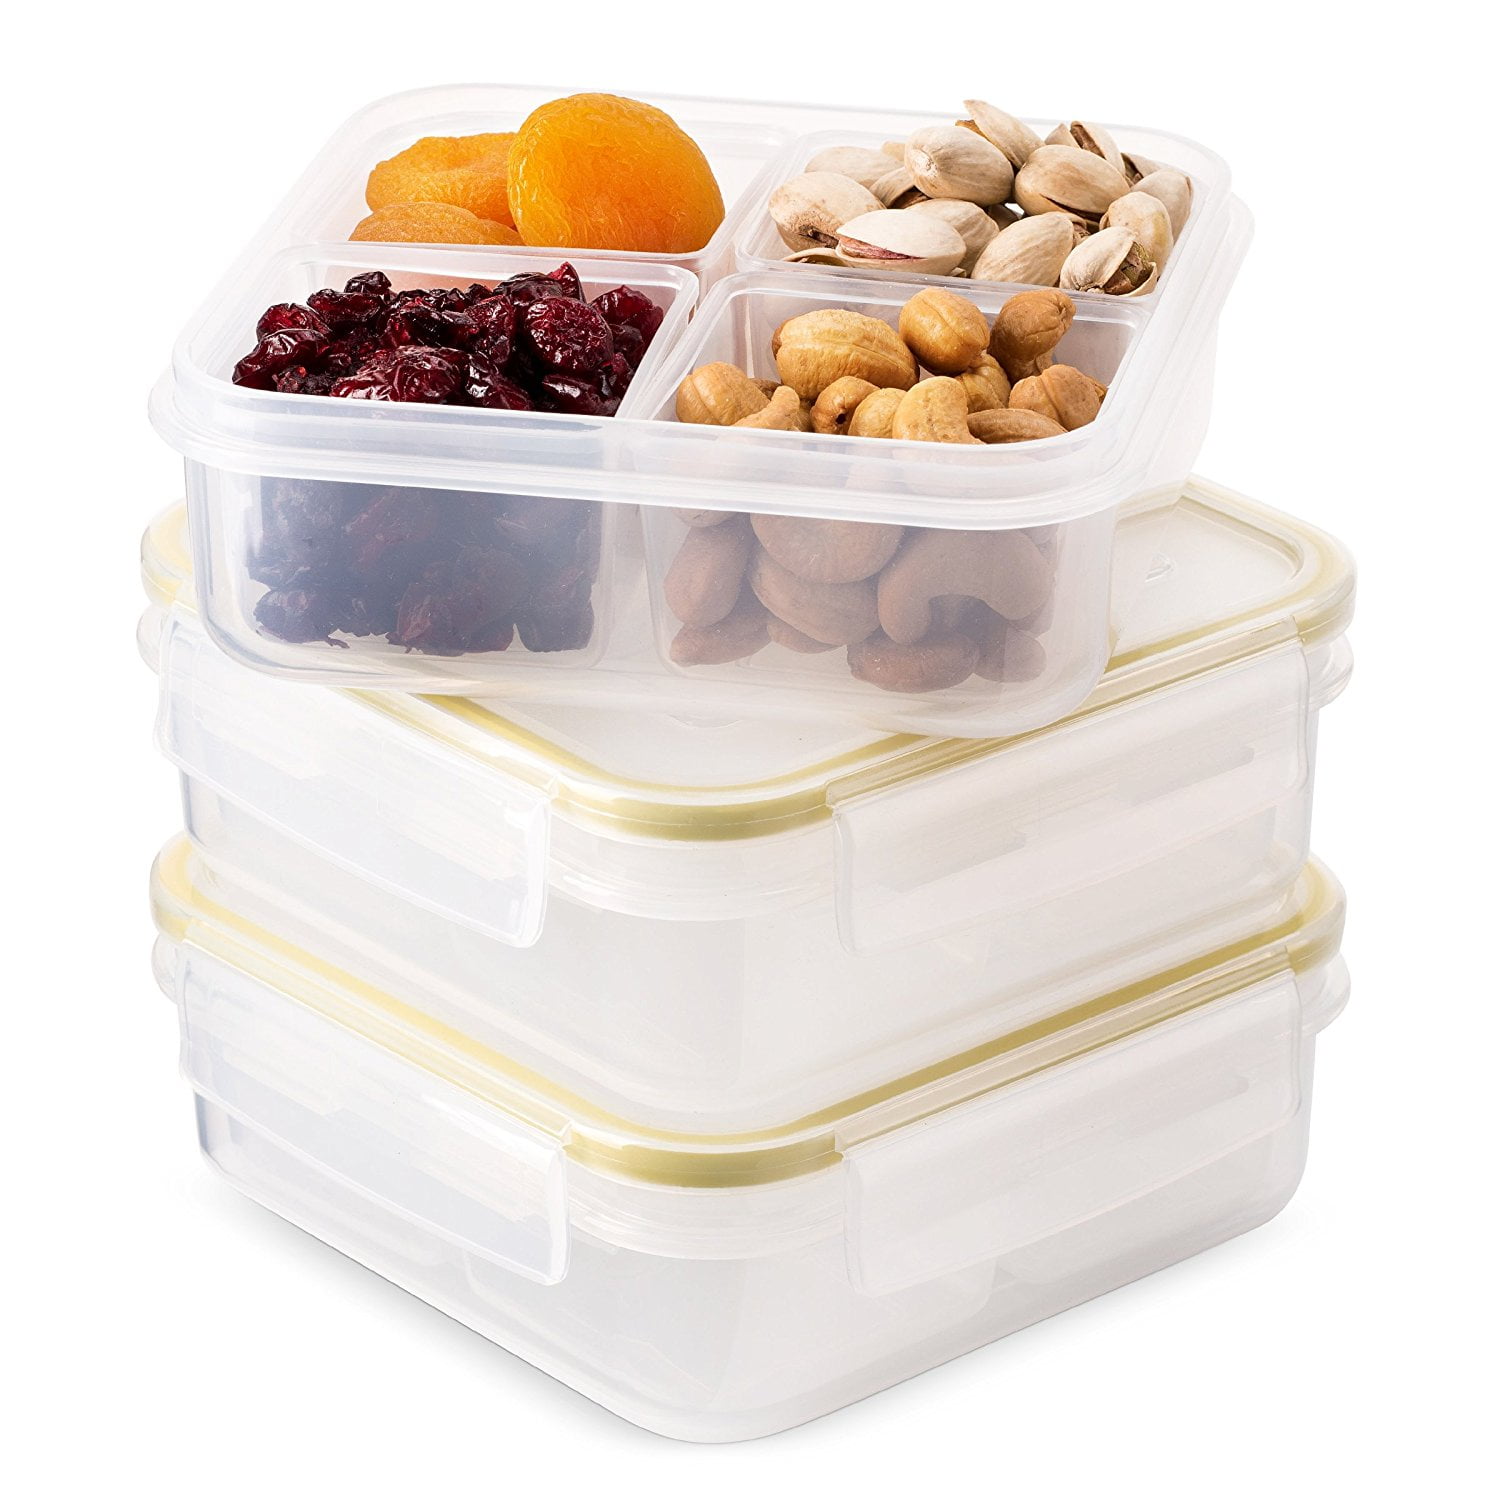 670924955771 Meal Prep Containers with Lids 7 Reusable 3 Compartment Food containers with .. 